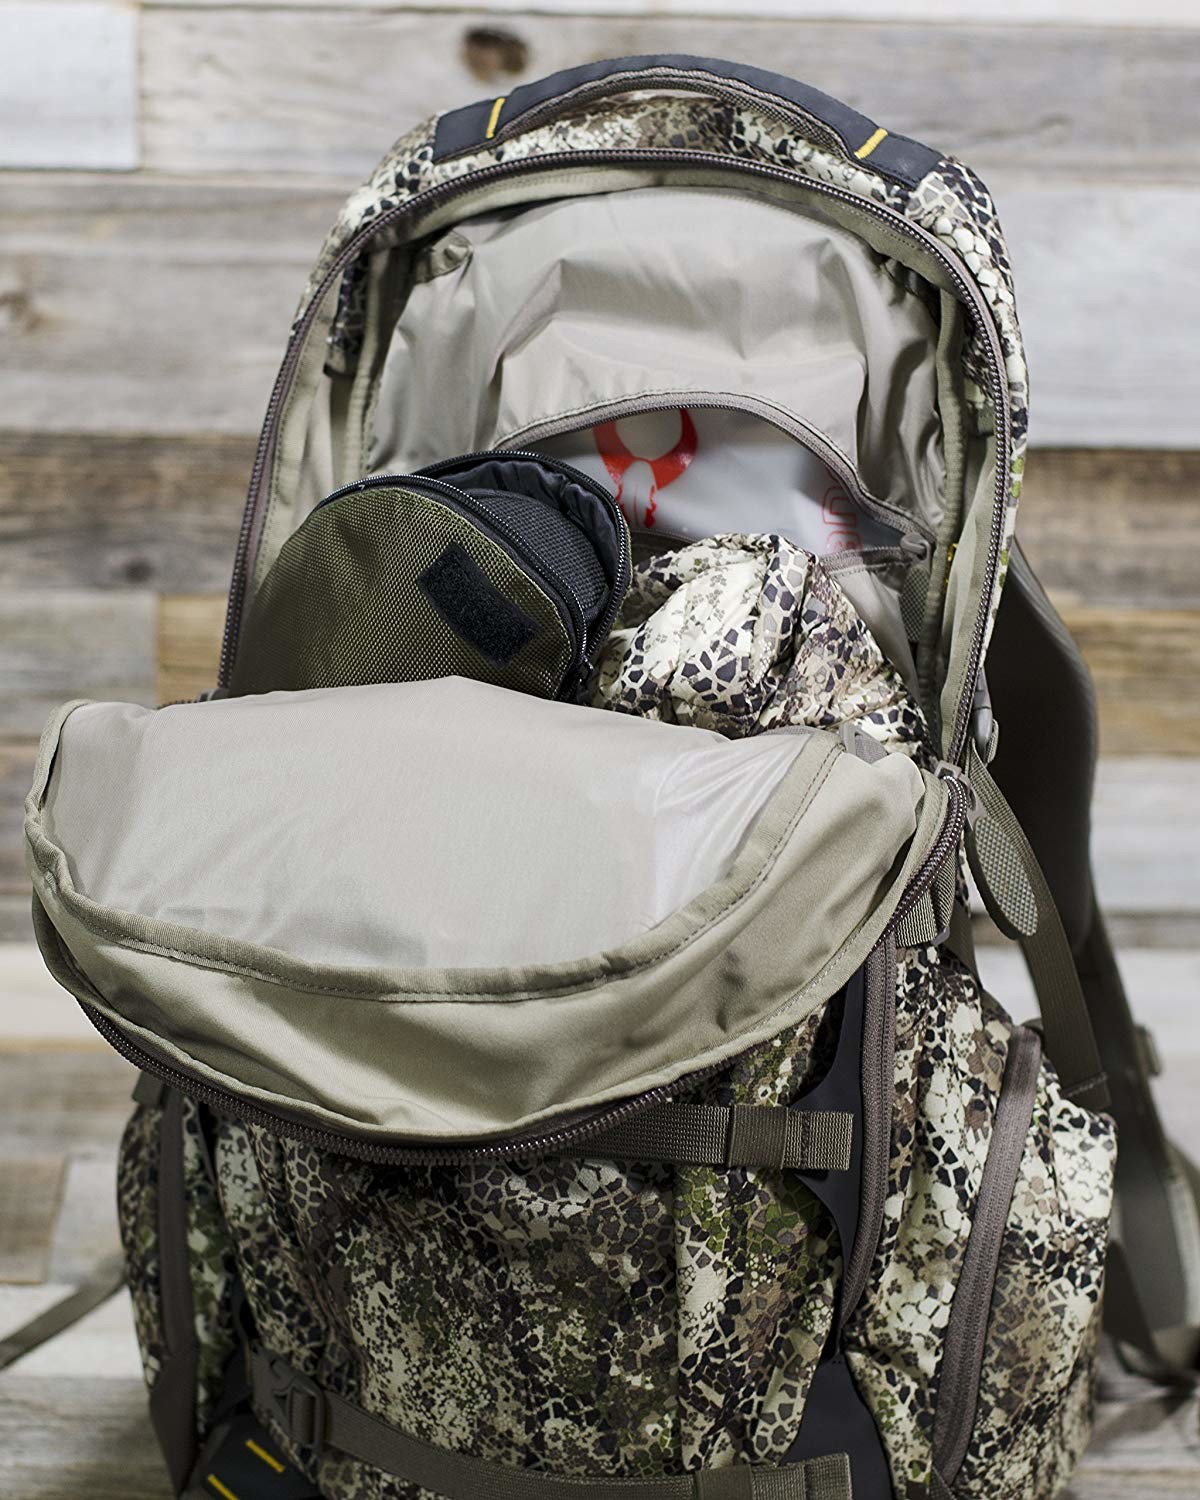 Badlands 21-12876 Diablo Dos Approach Camo Hunting Pack - image 5 of 5